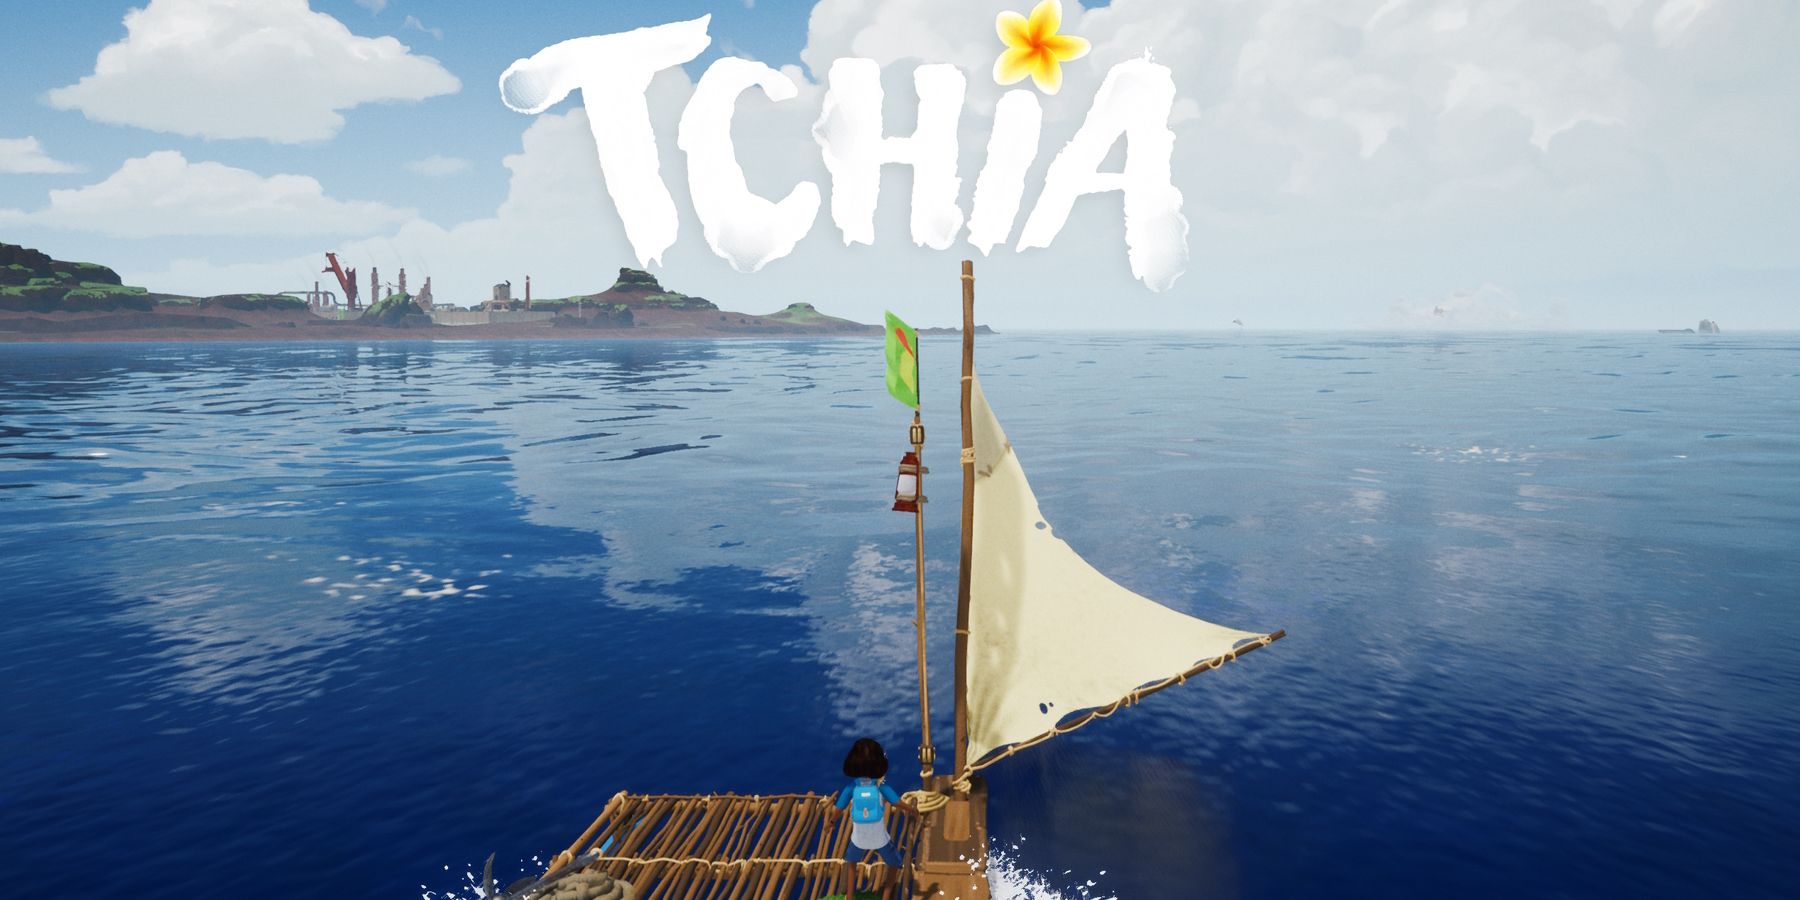 Image of a young girl on a handcrafted raft with a sail on a blue ocean with islands in the distance, the words in the clouds say Tchia